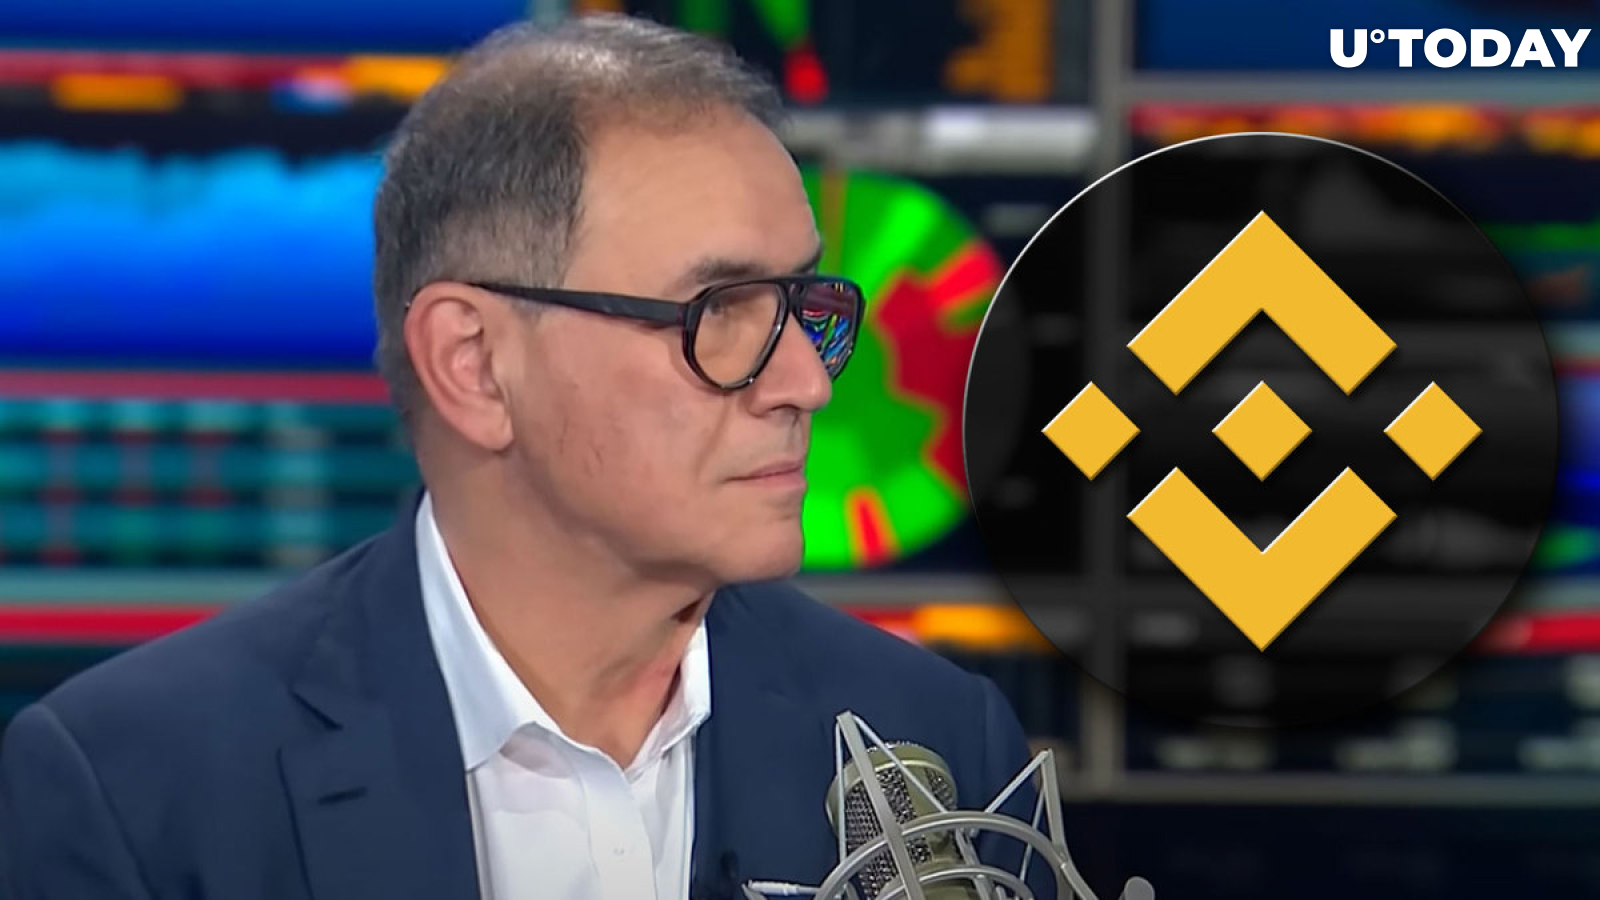 “Dr. Doom” Roubini Says Binance Is Same As FTX But Worse, Here’s Why